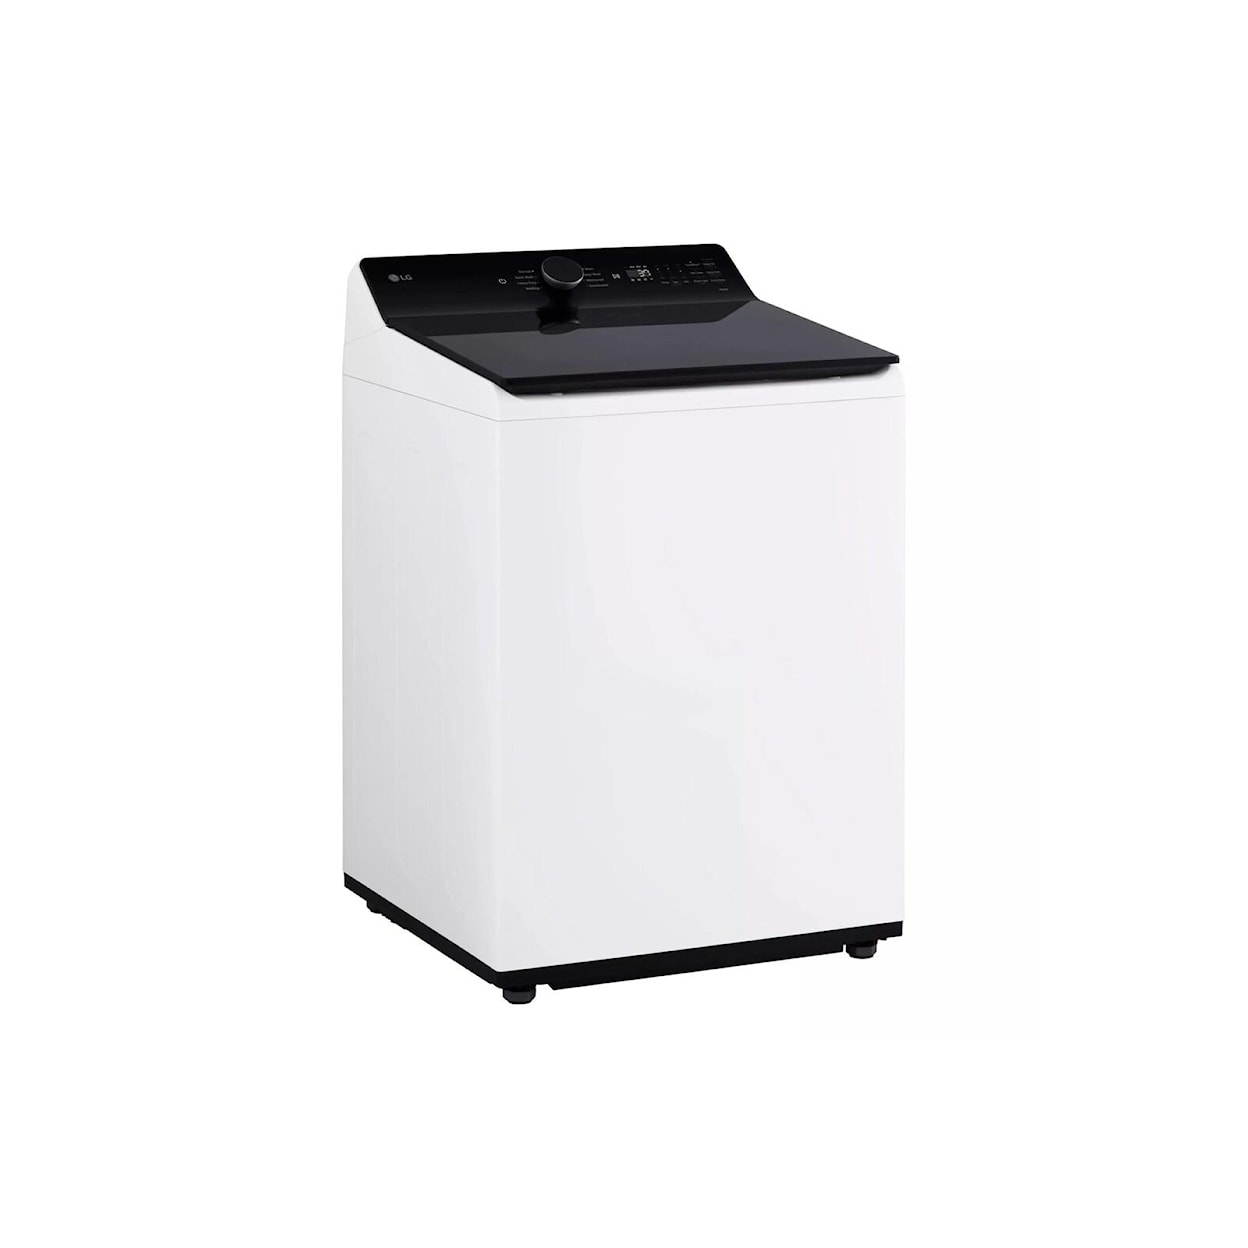 LG Appliances Laundry High Efficiency Top Load Washer